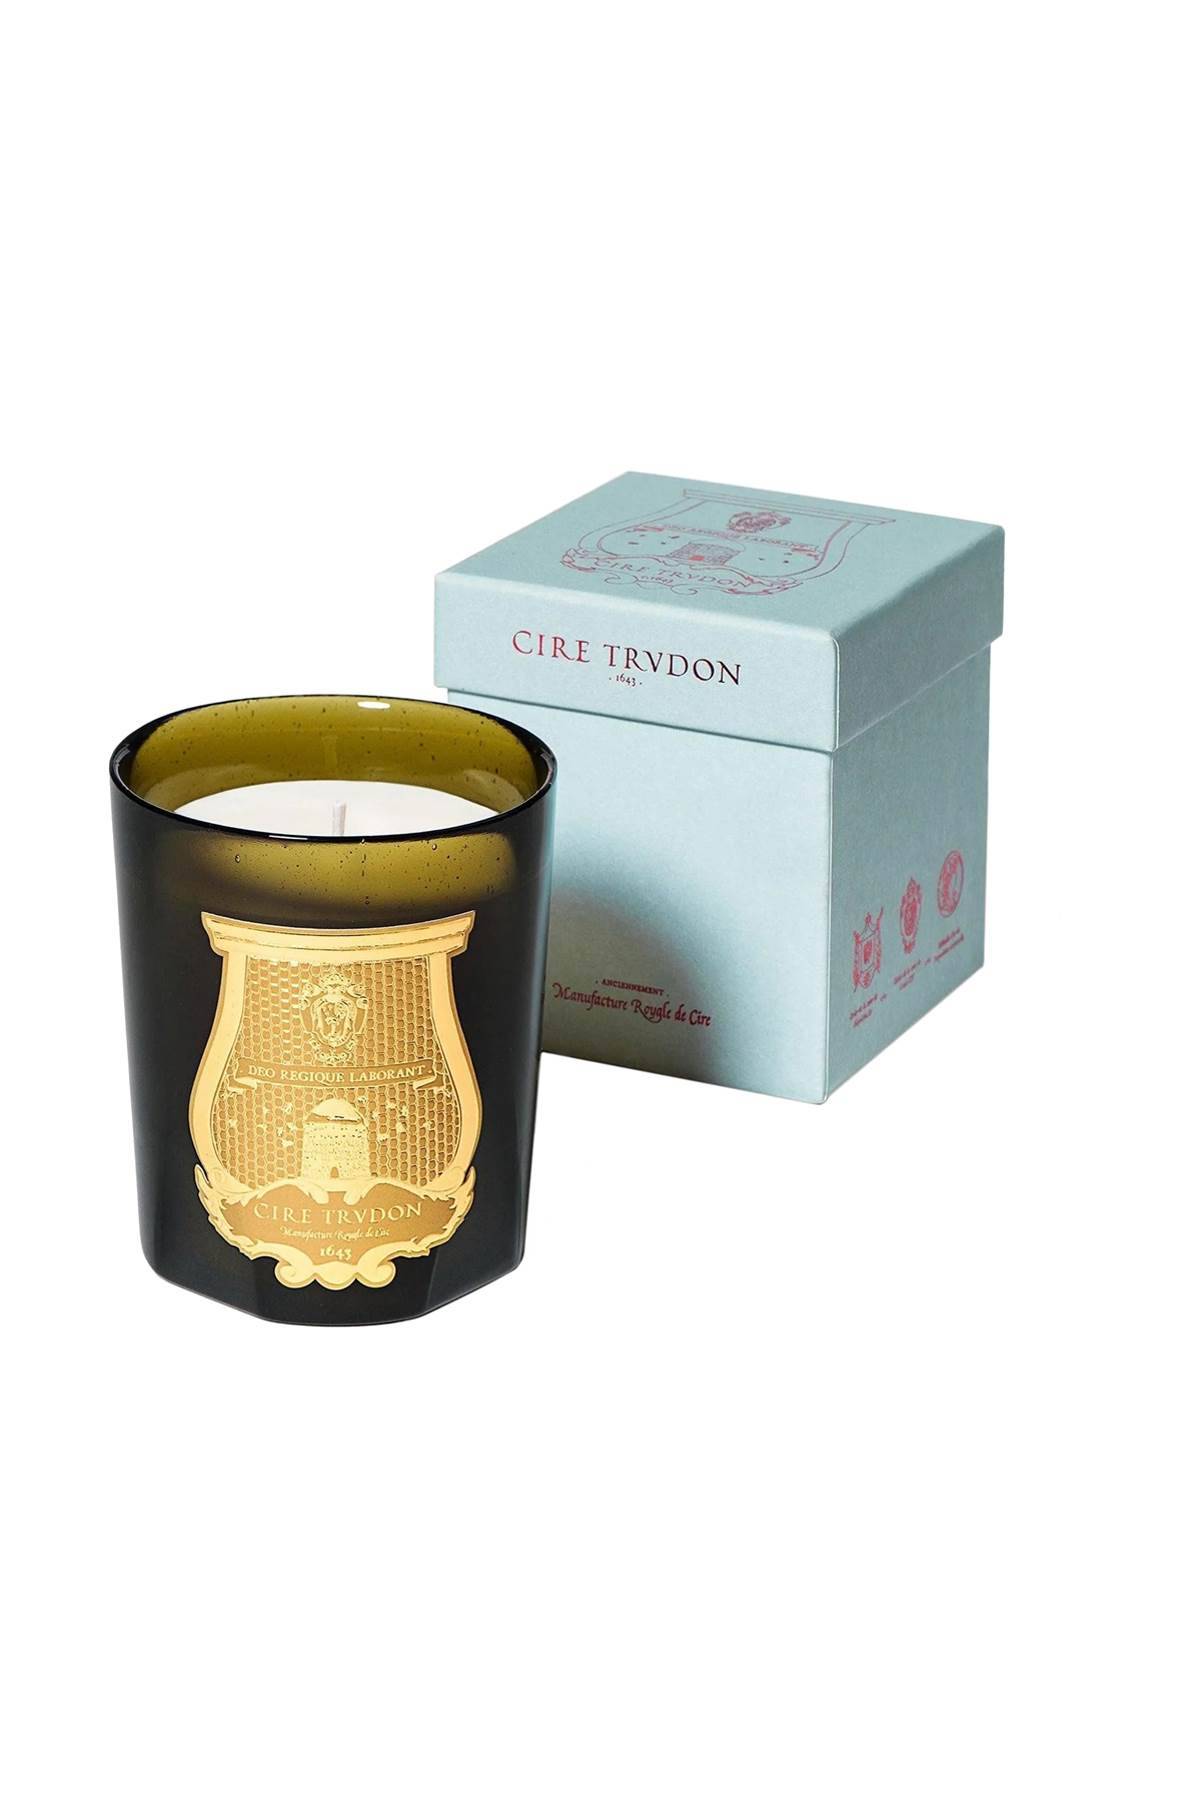 CIRE TRVDON CIRE TRVDON scented candle "holy spirit" -